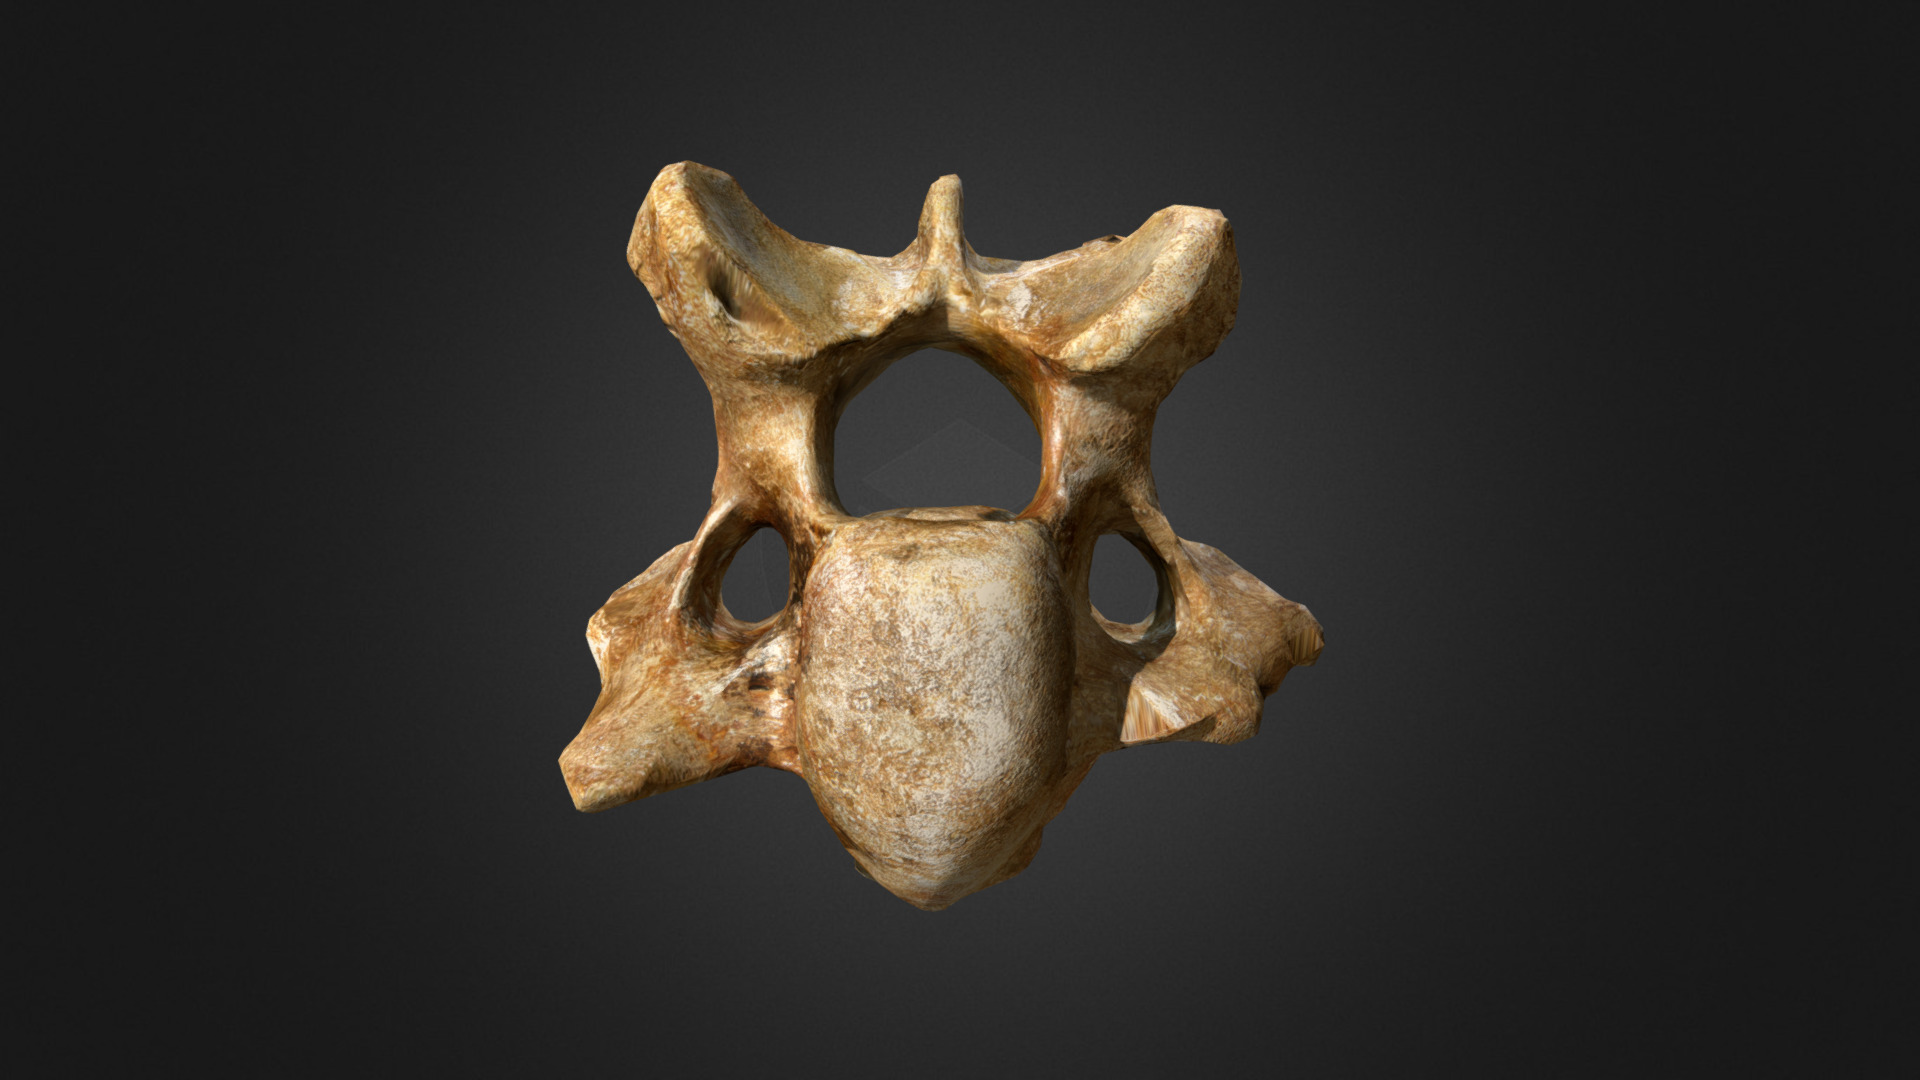 3D model Woolly Rhino 3rd Cervical Vertebra - This is a 3D model of the Woolly Rhino 3rd Cervical Vertebra. The 3D model is about a gold mask with a black background.